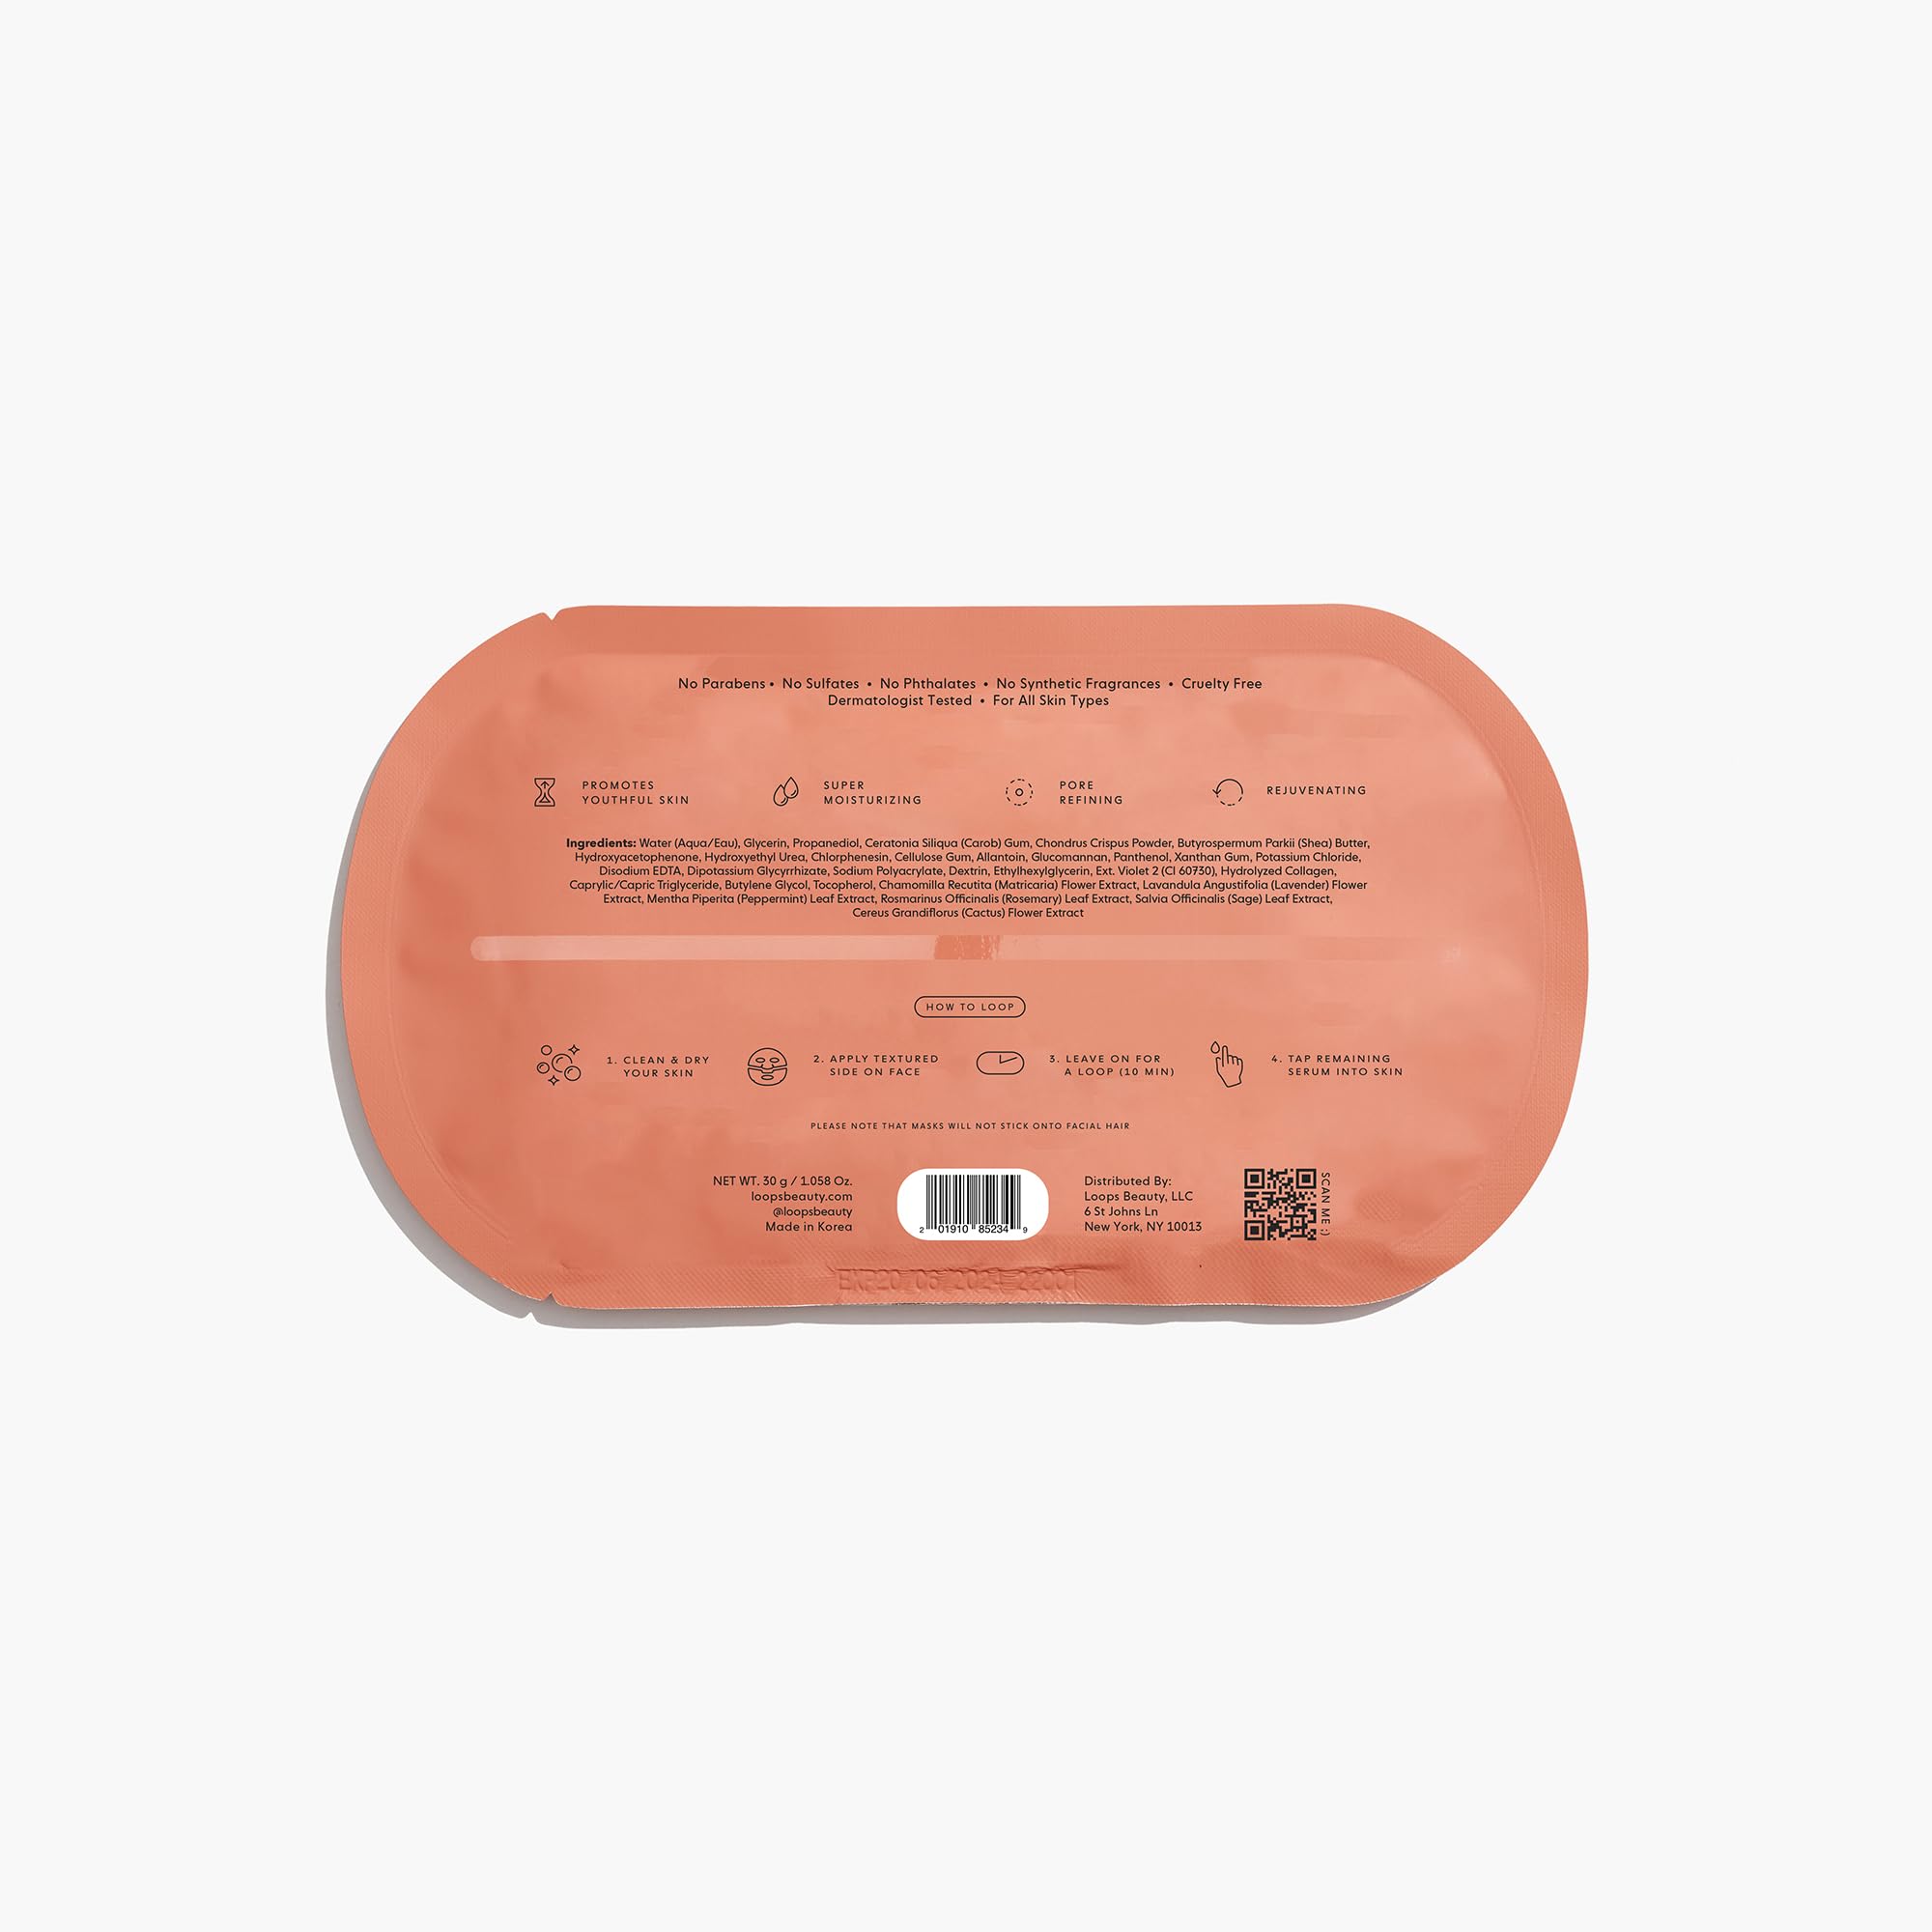 LOOPS WEEKLY RESET - Rejuvenating Hydrogel Eye Mask - Brighten, Hydrate, Nourish and Help Reduce Wrinkles for Refreshed Eyes - Reduces Signs of Puffiness - For Resilient-Looking Skin - 1 Pc